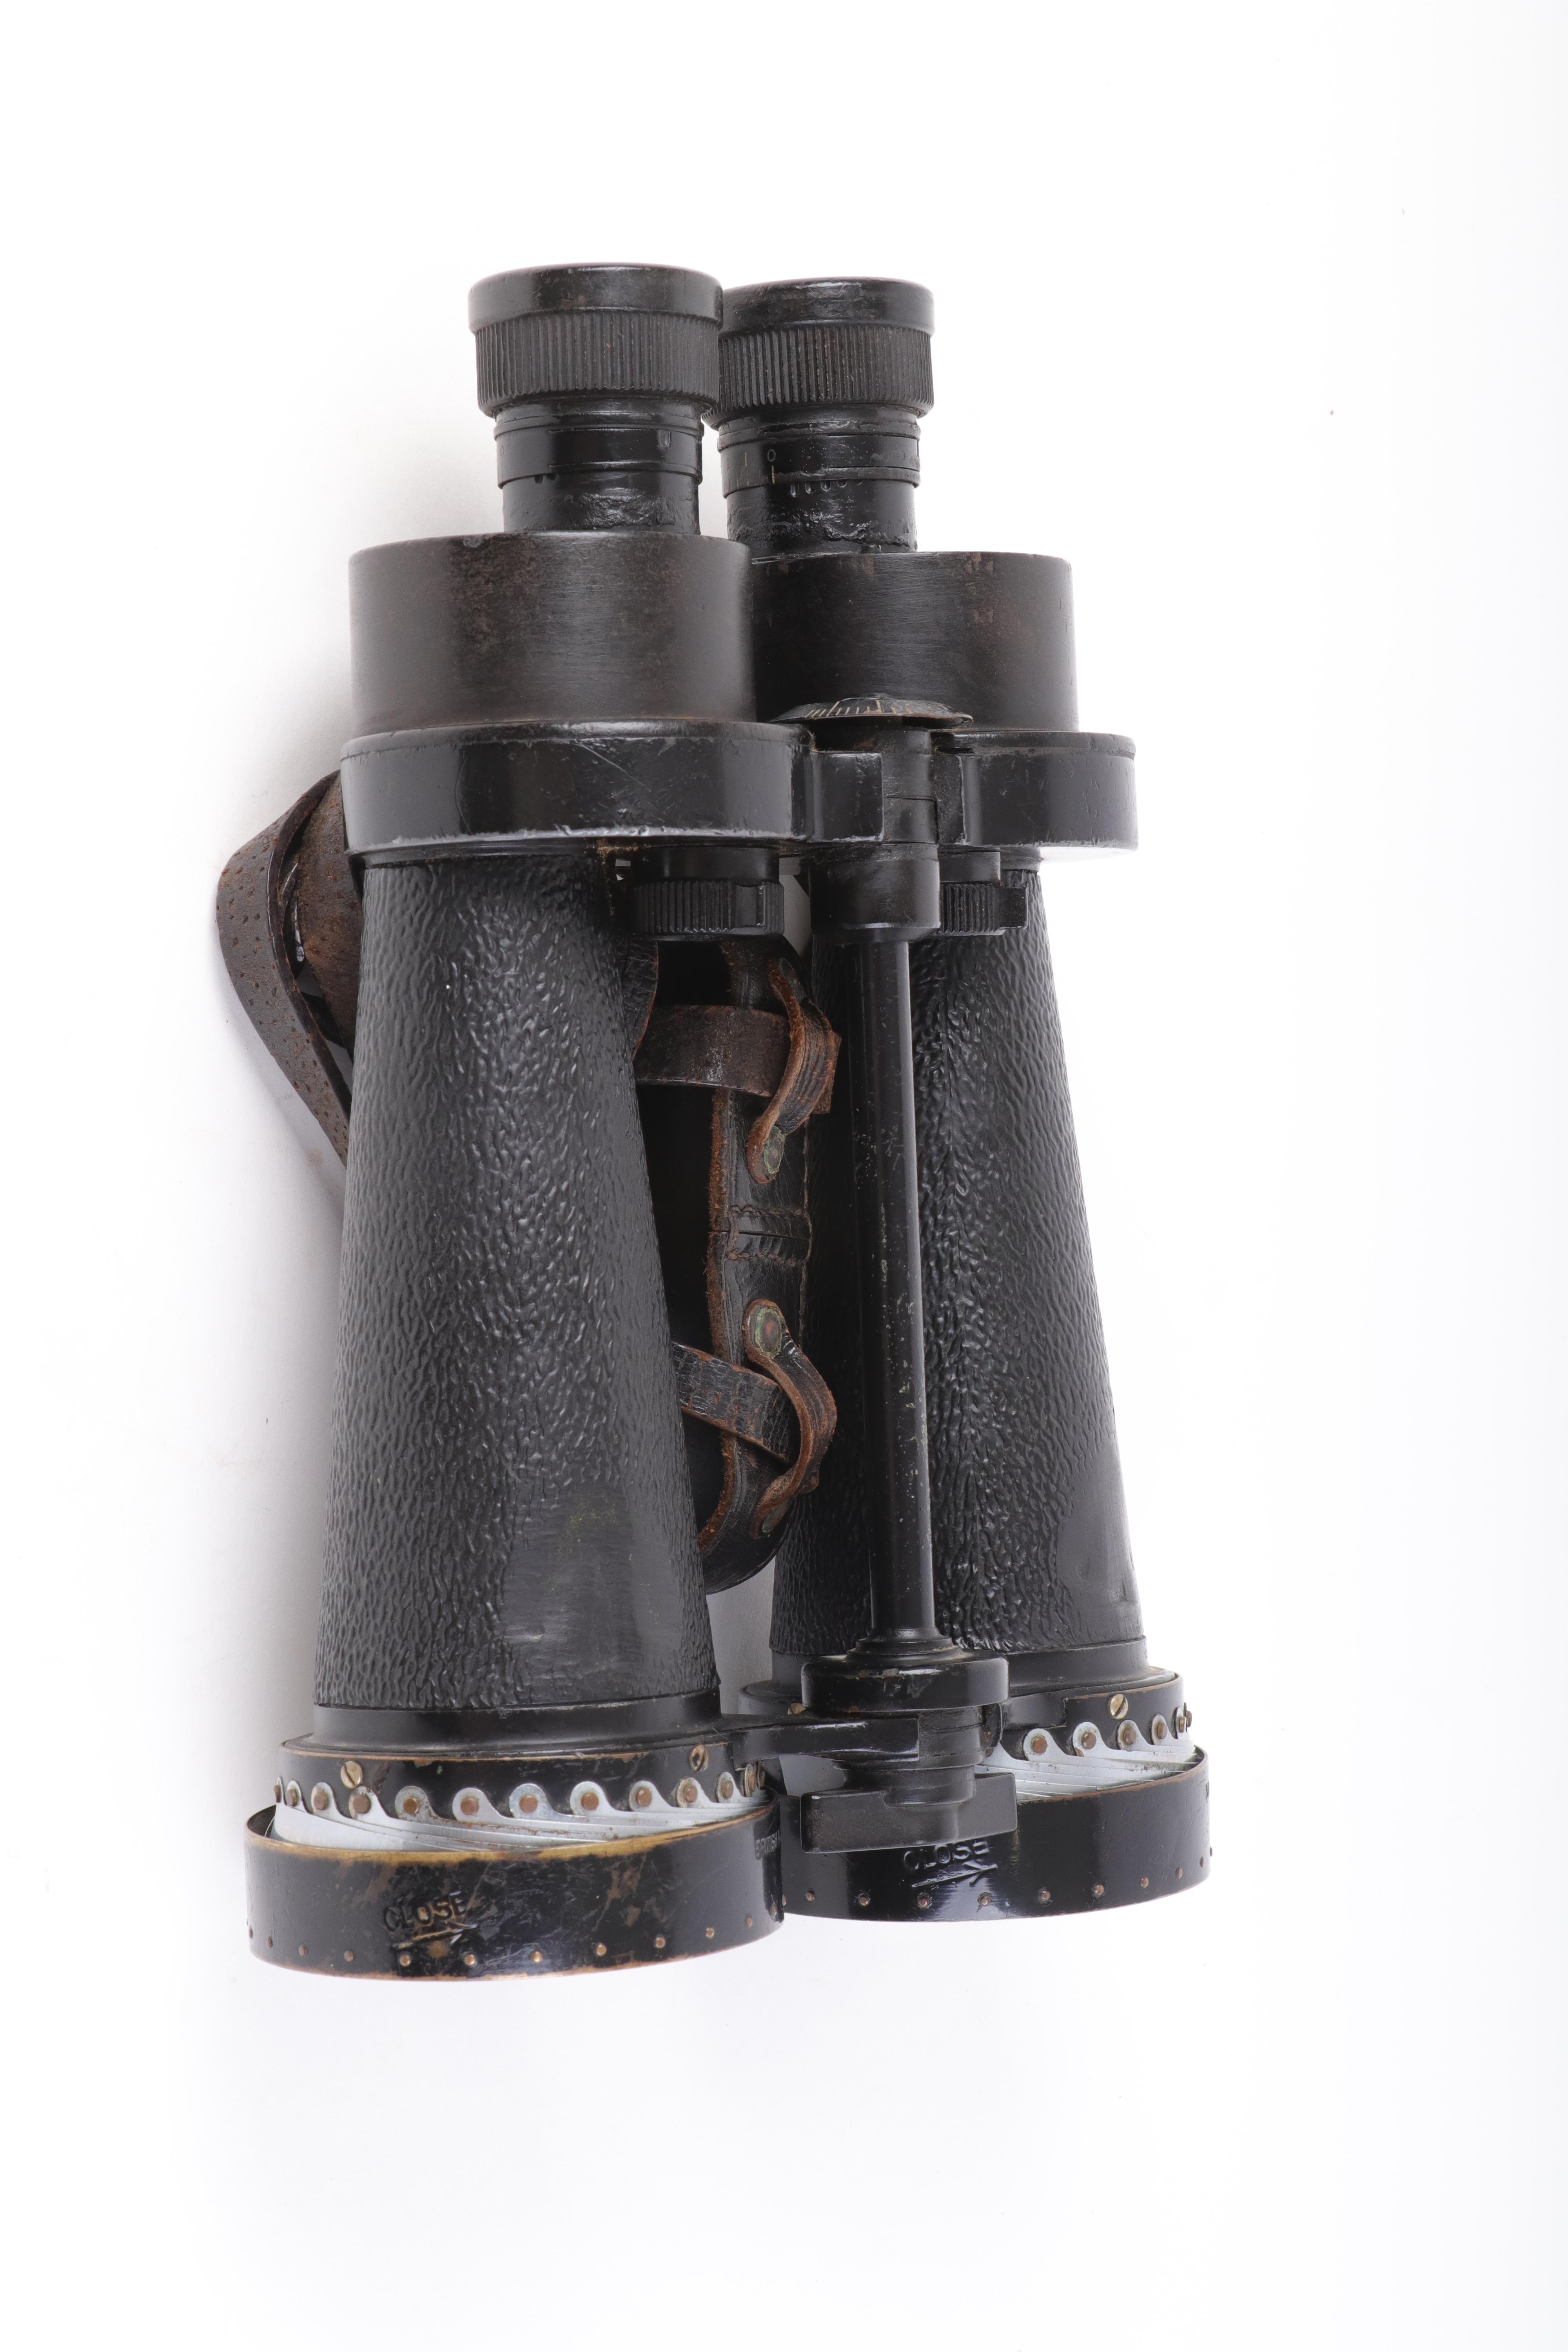 WWII Barr & Stroud C.F.41 7x military binoculars, broad arrow marks, with expanding weather shields - Image 14 of 14